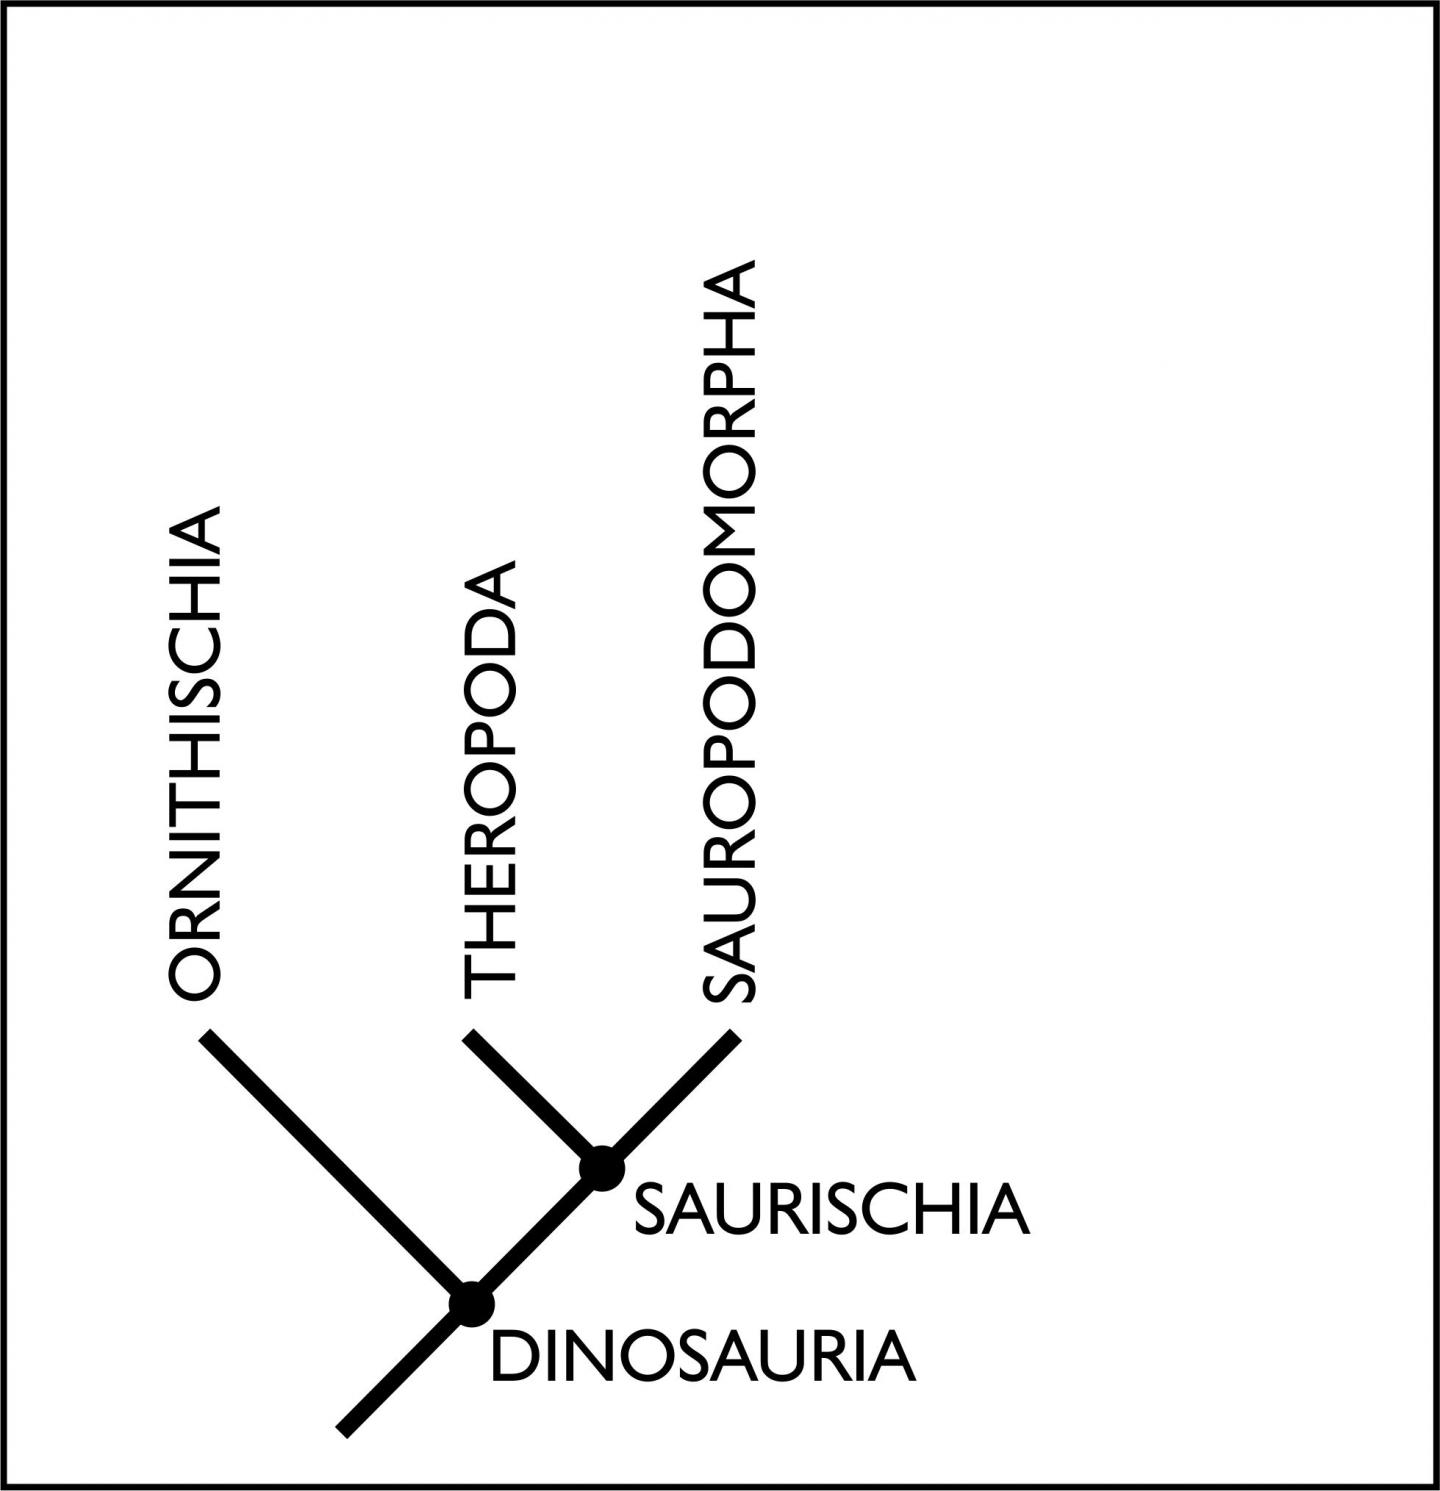 Figure 1: The Old Family Tree Structure